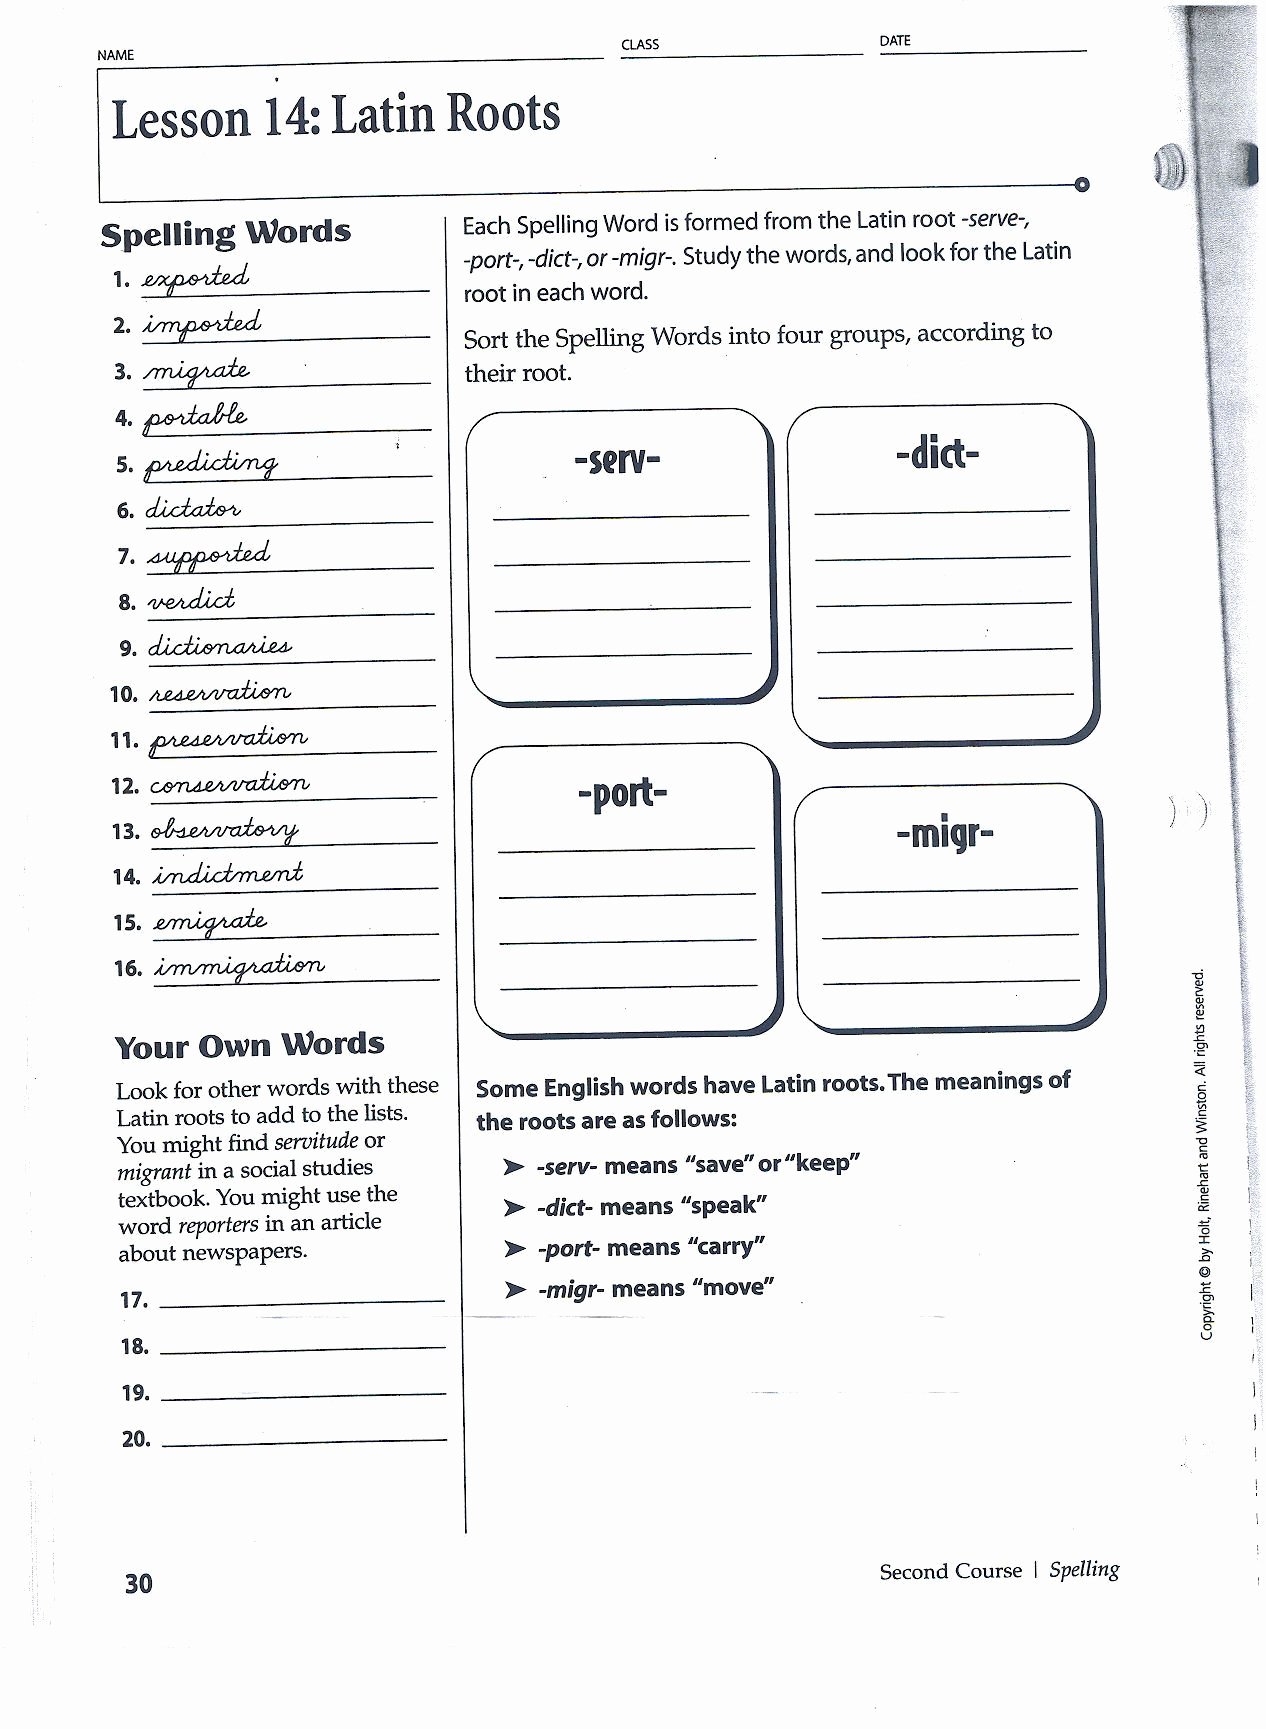 Greek and Latin Roots Worksheet Inspirational Greek and Latin Roots Worksheet Pdf